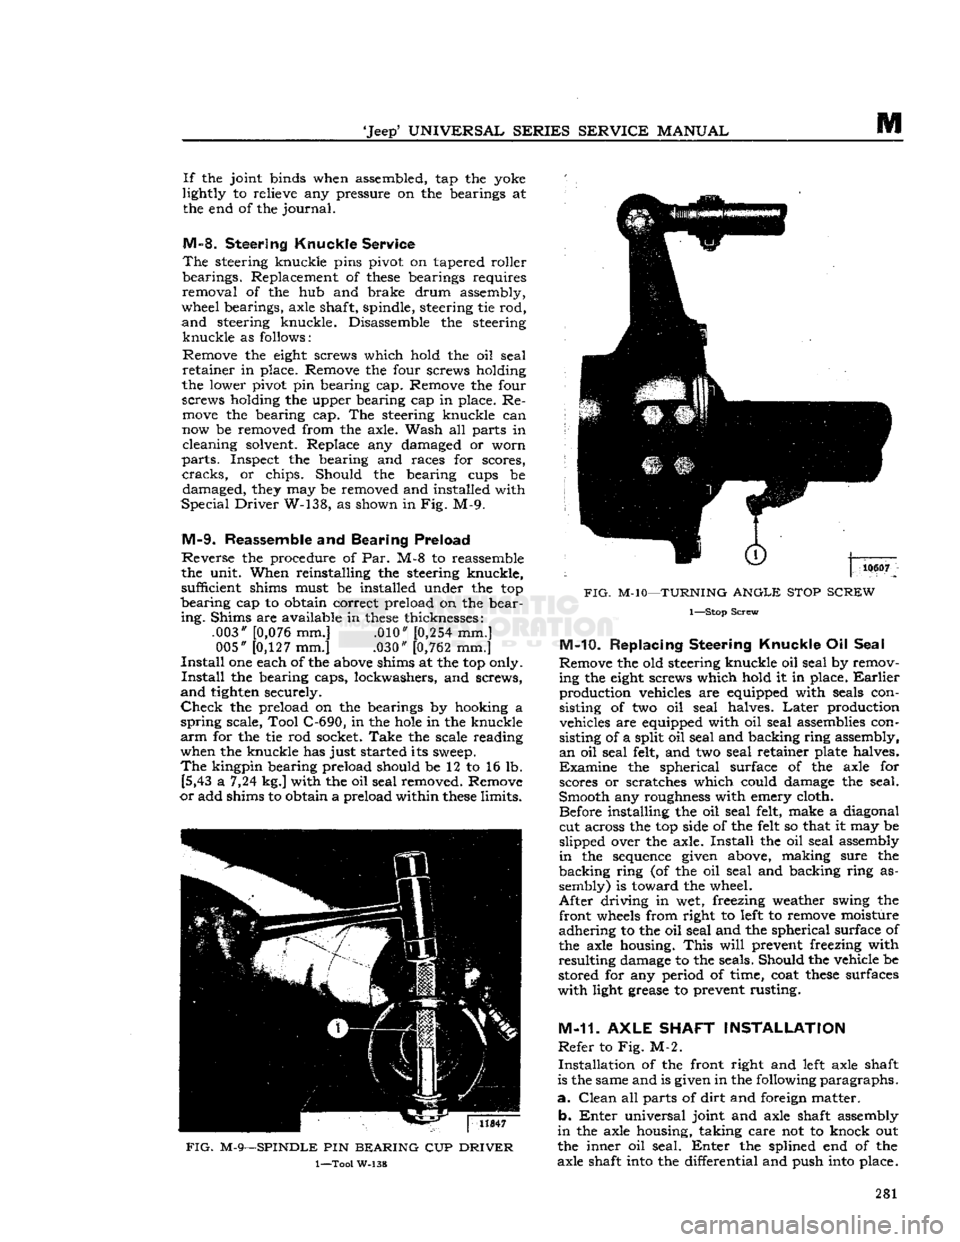 JEEP CJ 1953  Service Manual 
Jeep
 UNIVERSAL
 SERIES
 SERVICE
 MANUAL 

M 
If
 the joint binds when assembled, tap the yoke 
lightly to relieve any pressure on the bearings at  the end of the
 journal. 

M-8-
 Steering
 Knuckl